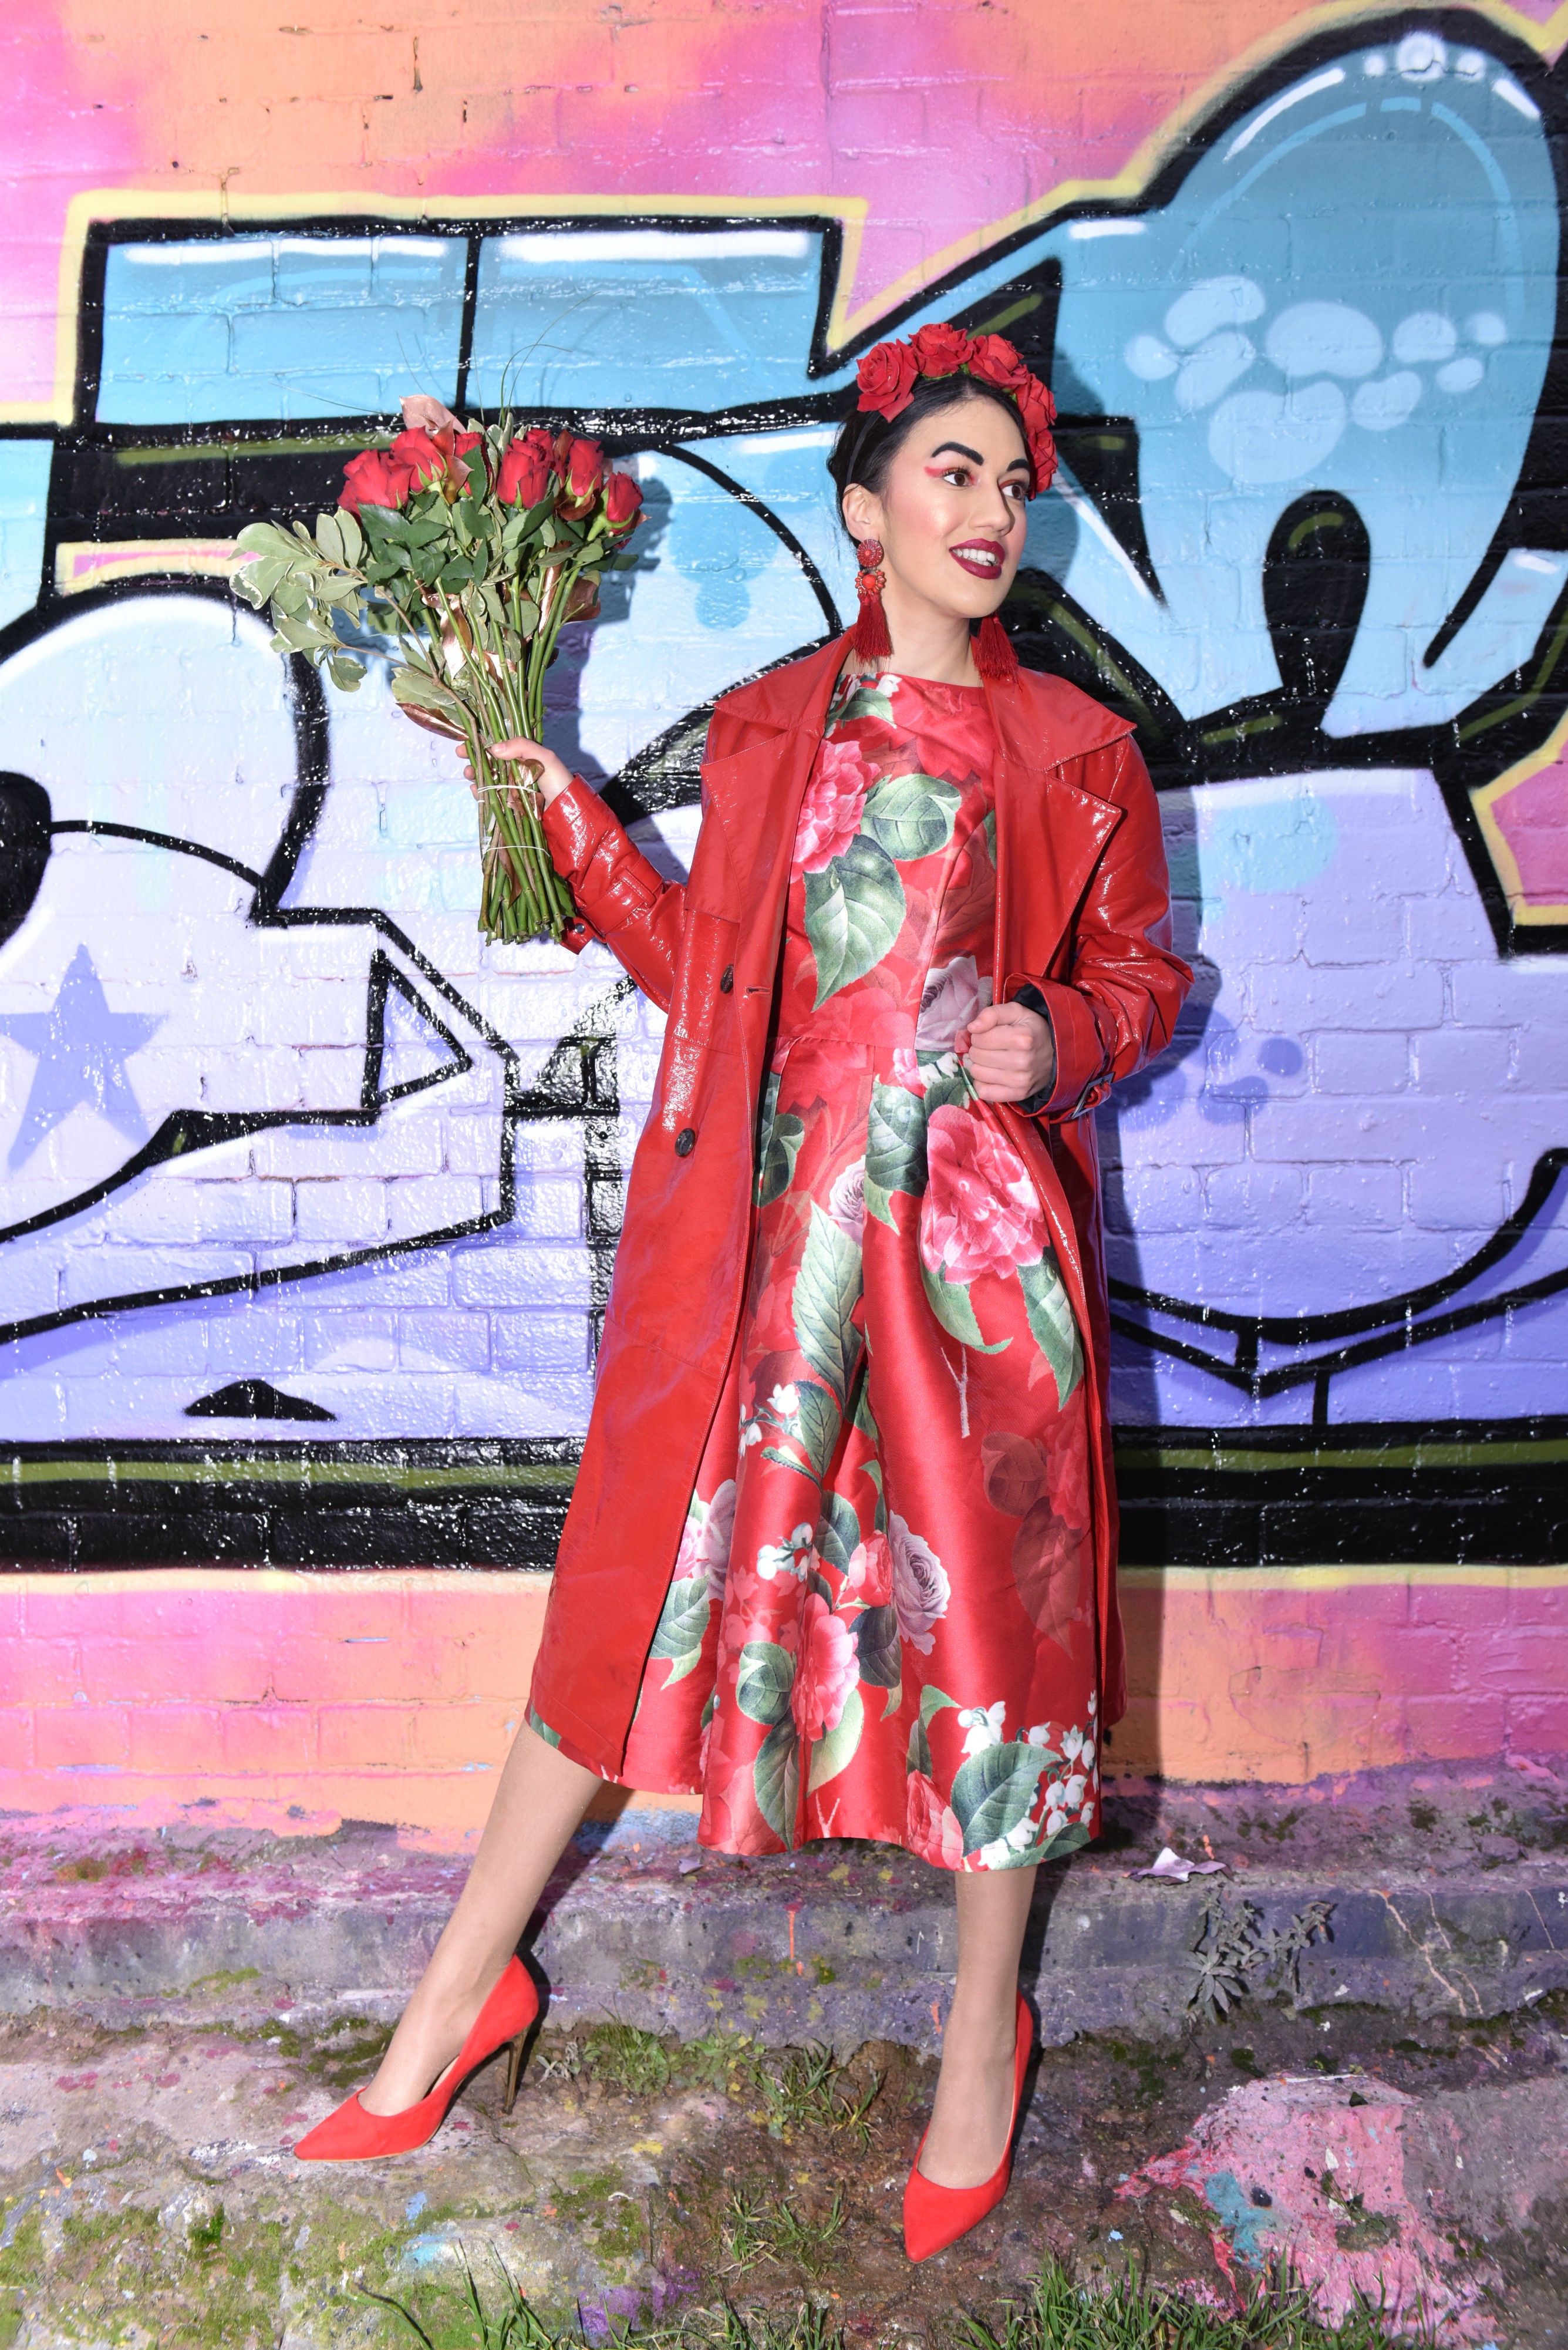 <img src="ana.jpg" alt="ana red floral dress and red coat"/> 